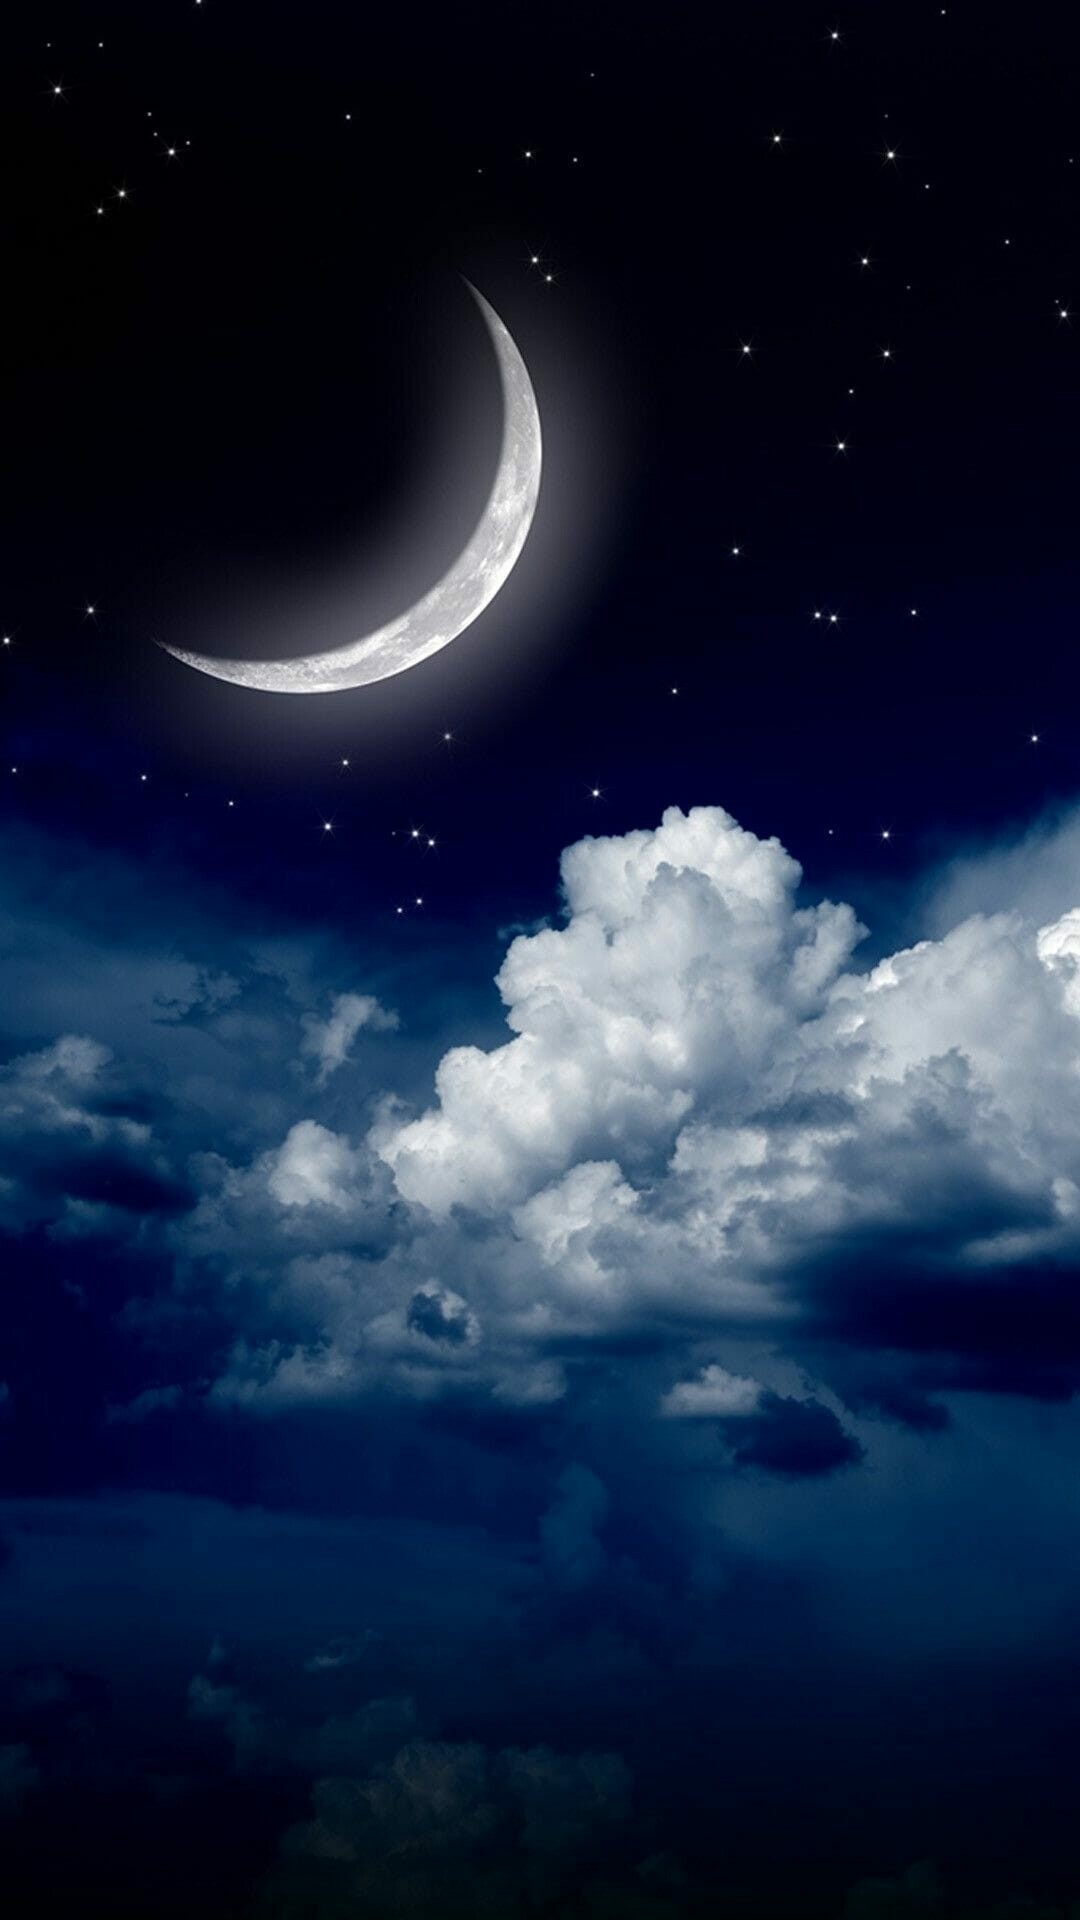 Moonlight: Waning crescent, Moon phase, The shape of the Moon's directly sunlit portion. 1080x1920 Full HD Wallpaper.